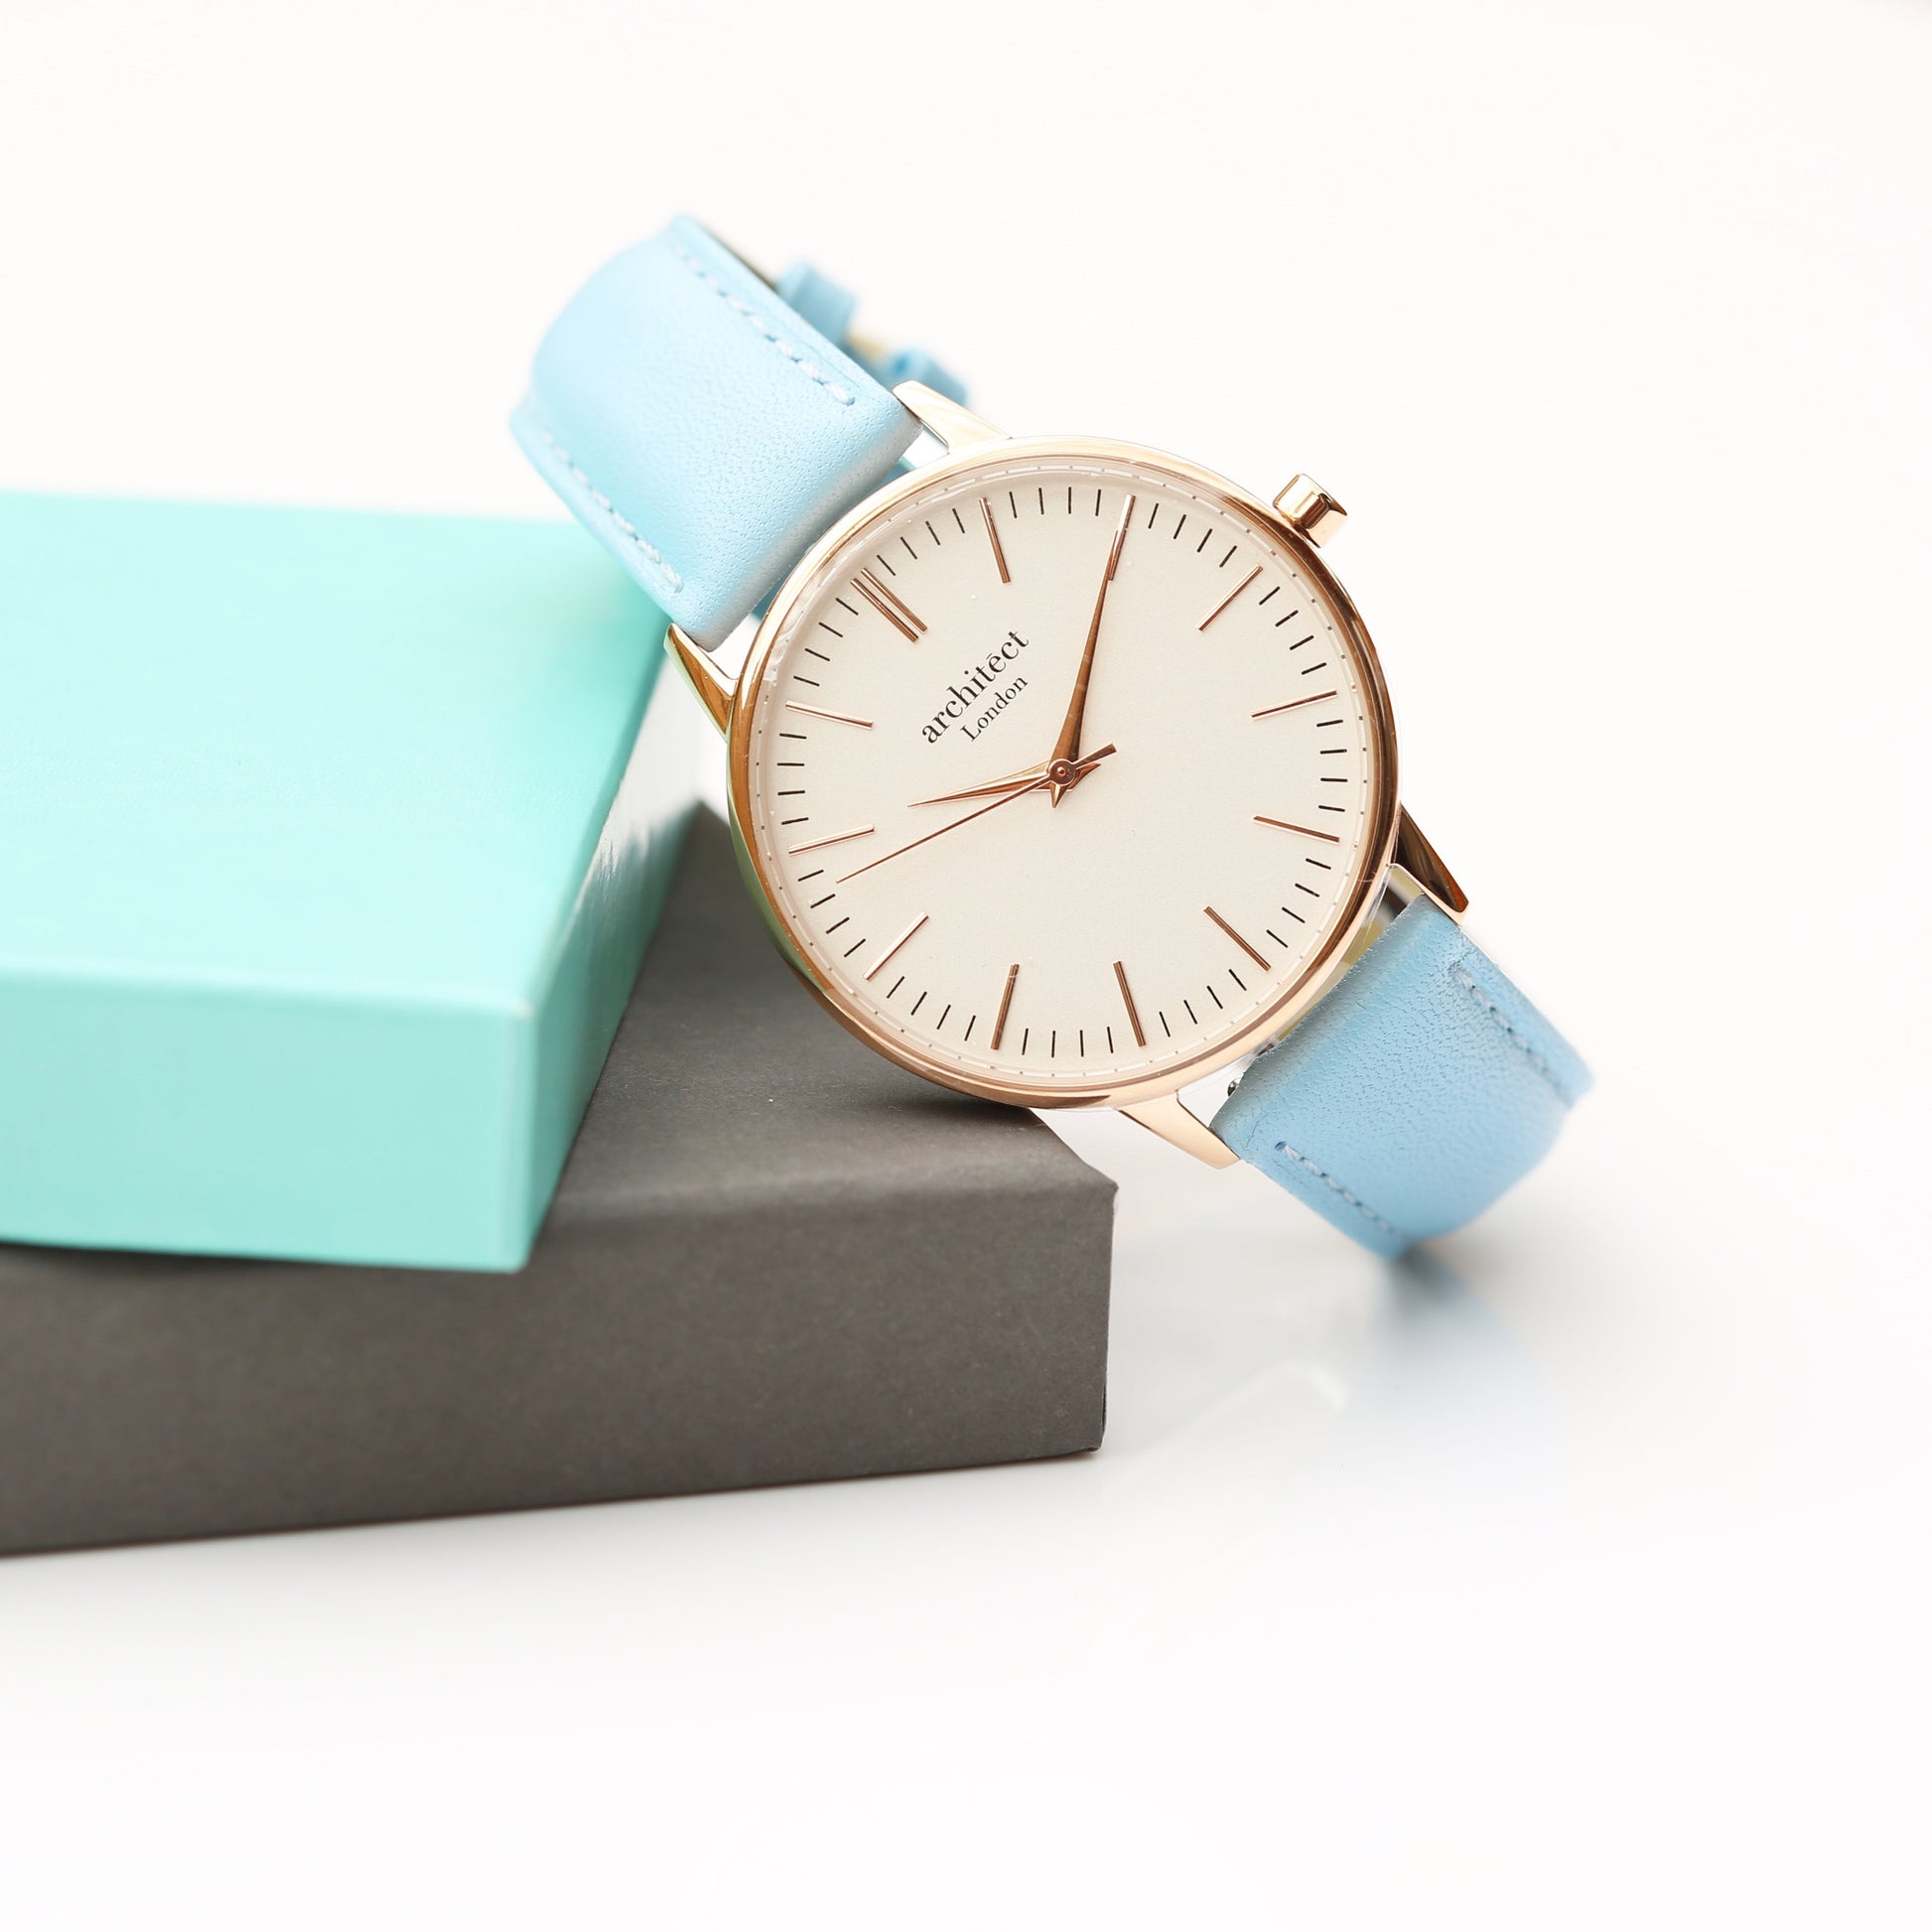 Personalized Ladies' Watches - Women's Engraved Watch In Light Blue 